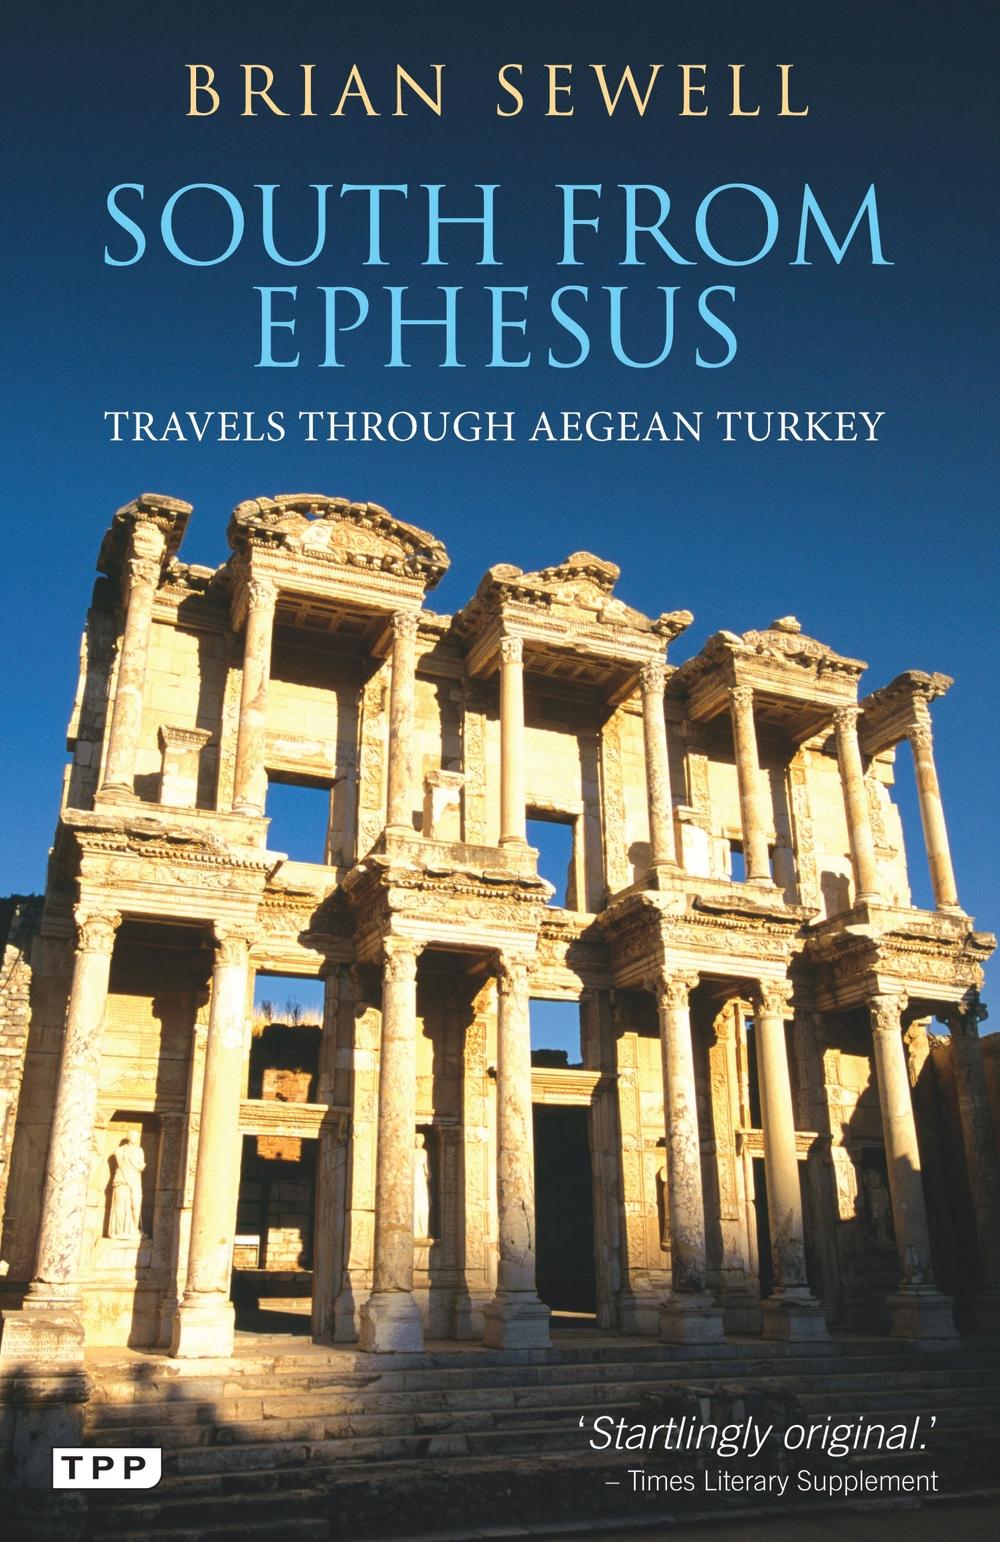 South from Ephesus - Brian Sewell